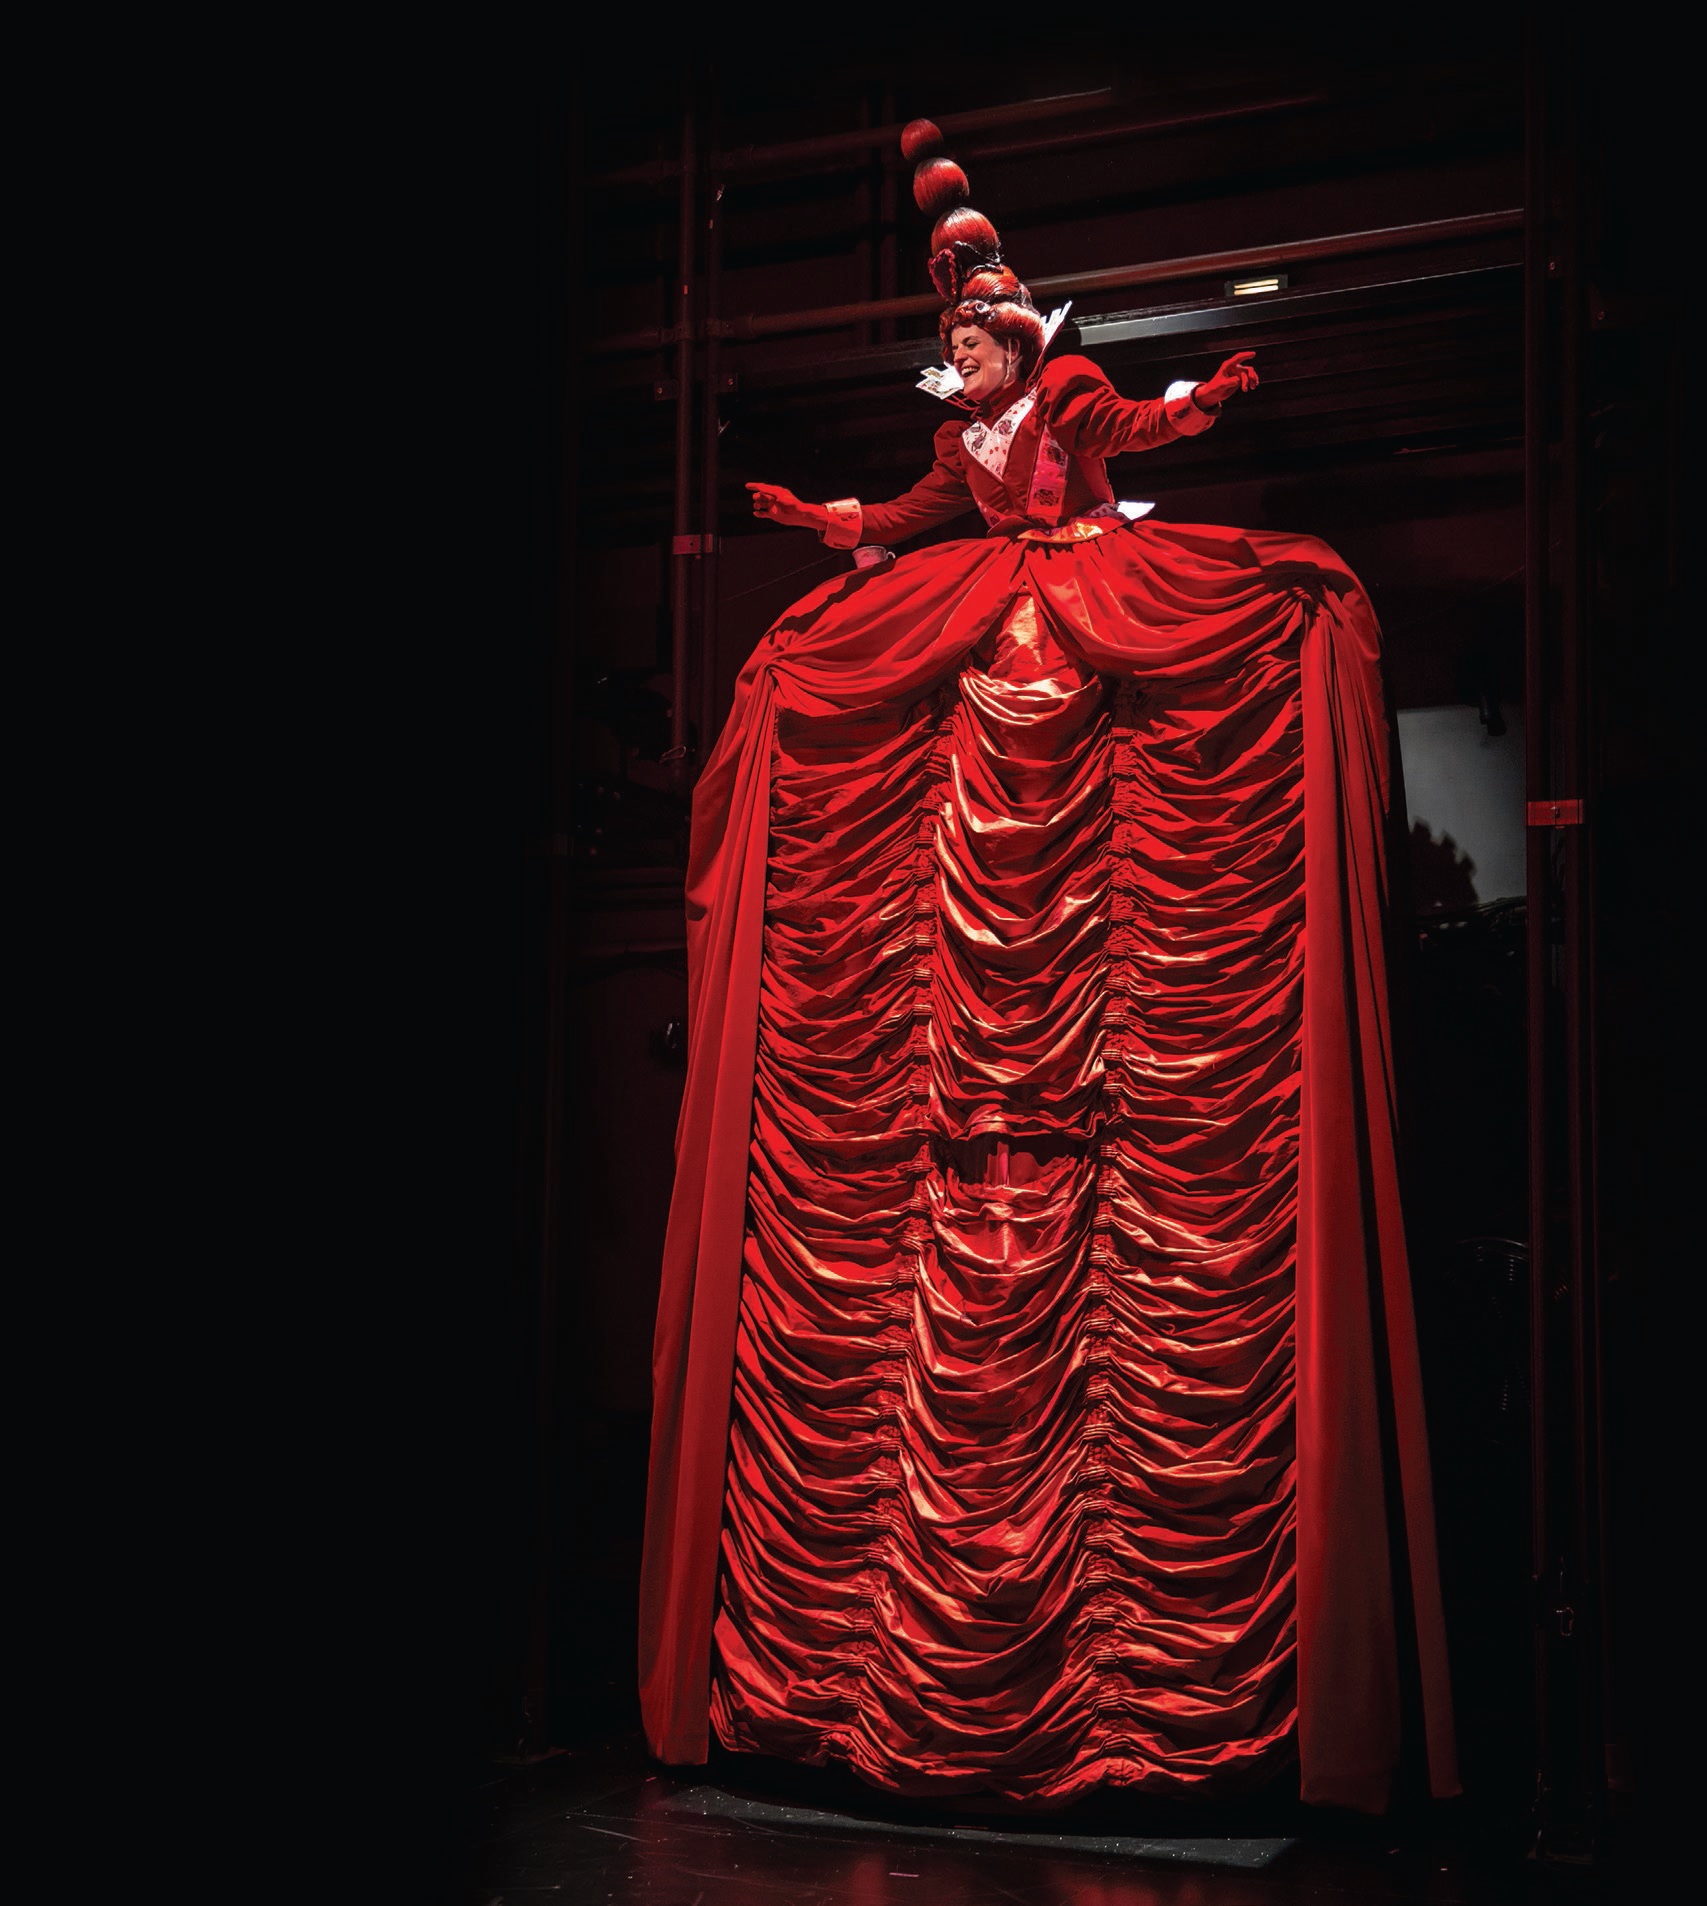 Molly Brennan makes an imposing impression as the Red Queen in the 2015 production of Lookingglass Alice. PHOTO BY LIZ LAUREN